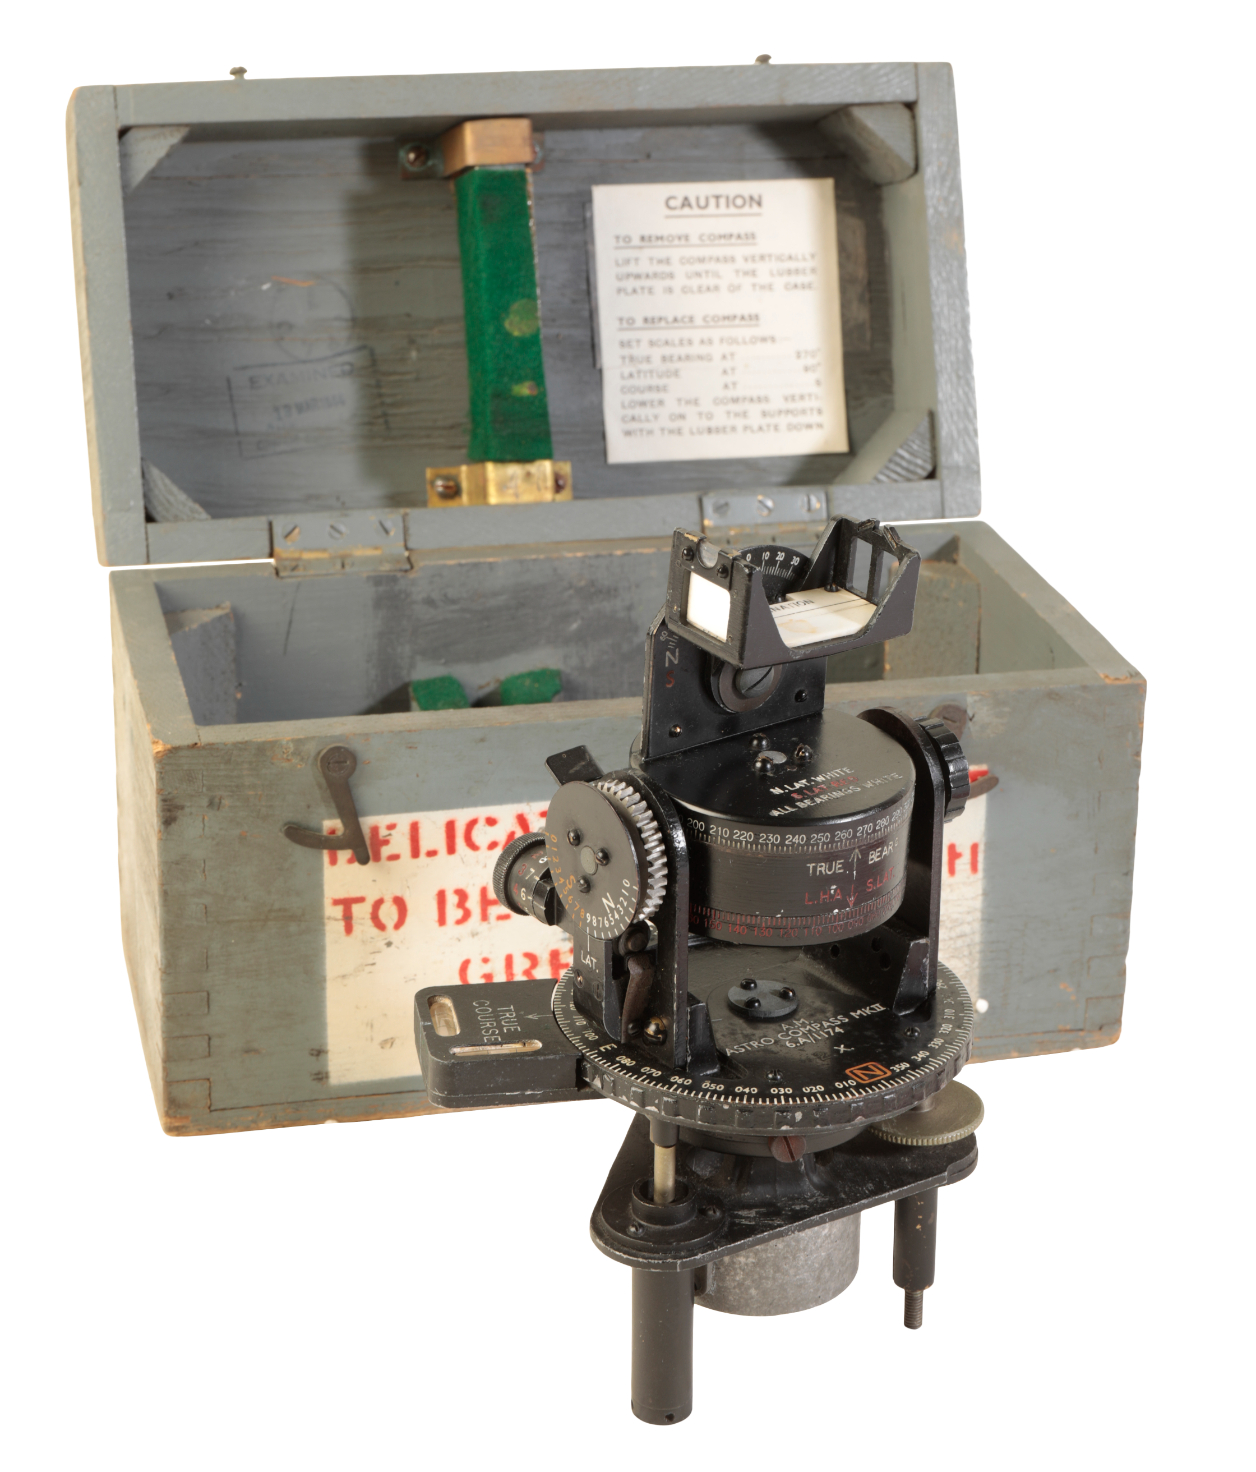 AN RAF ASTRO COMPASS MKII 6A/1174, in